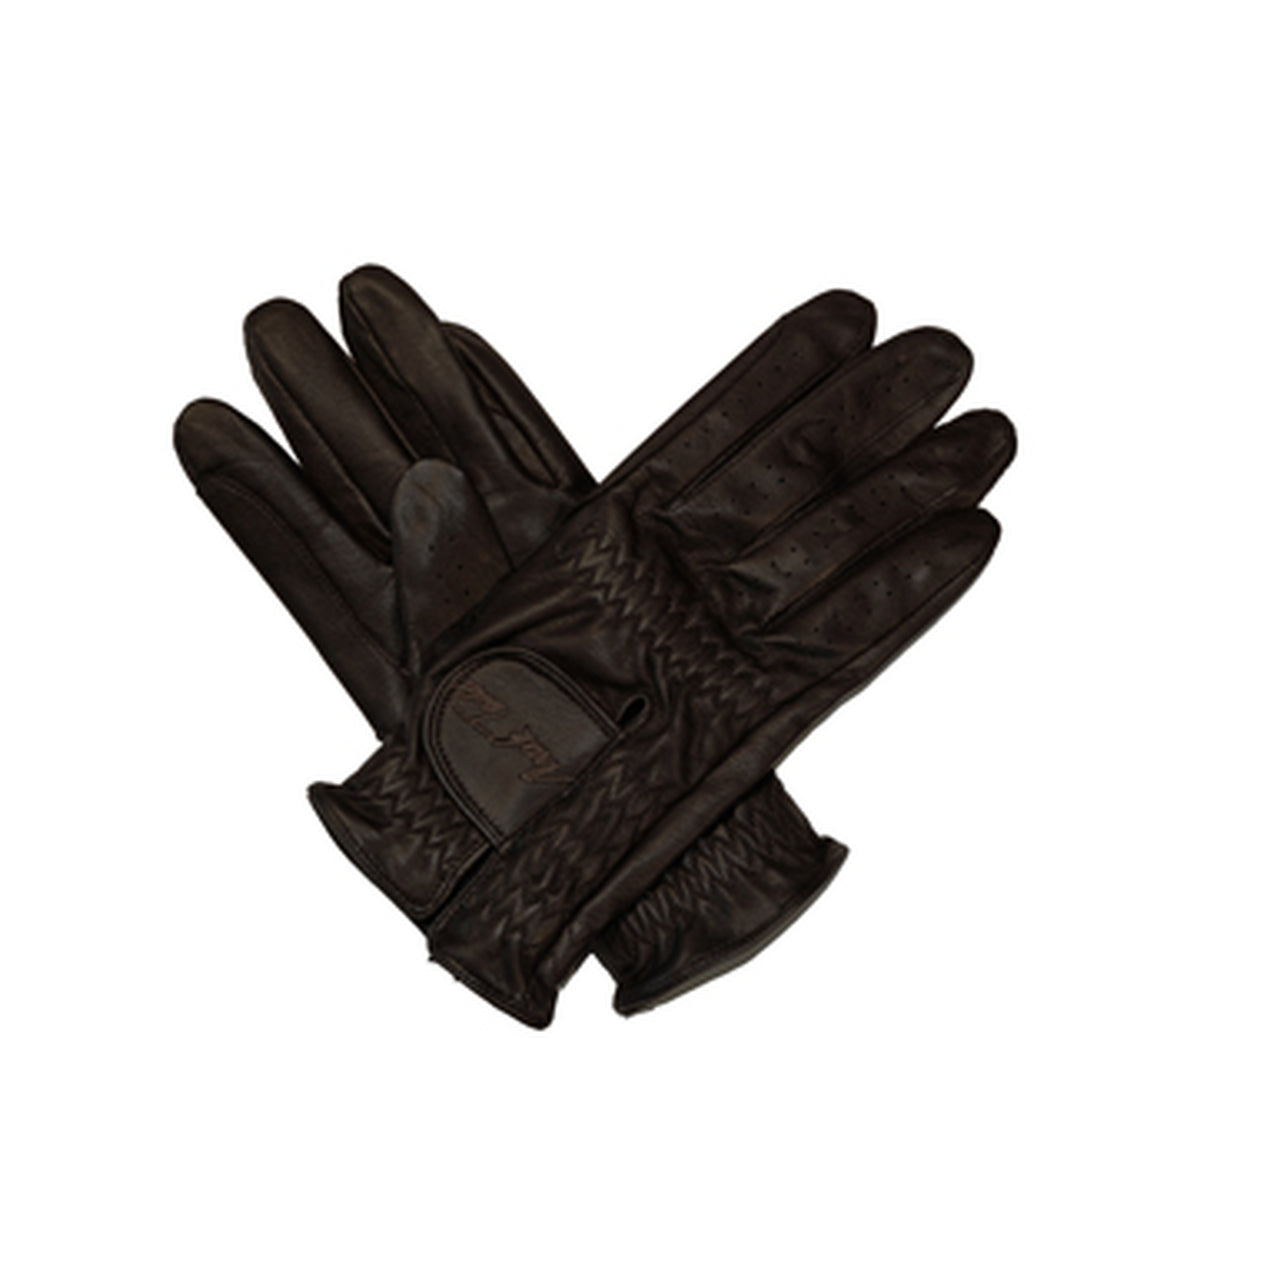 Mark Todd Childrens Show Leather Black Riding Glove